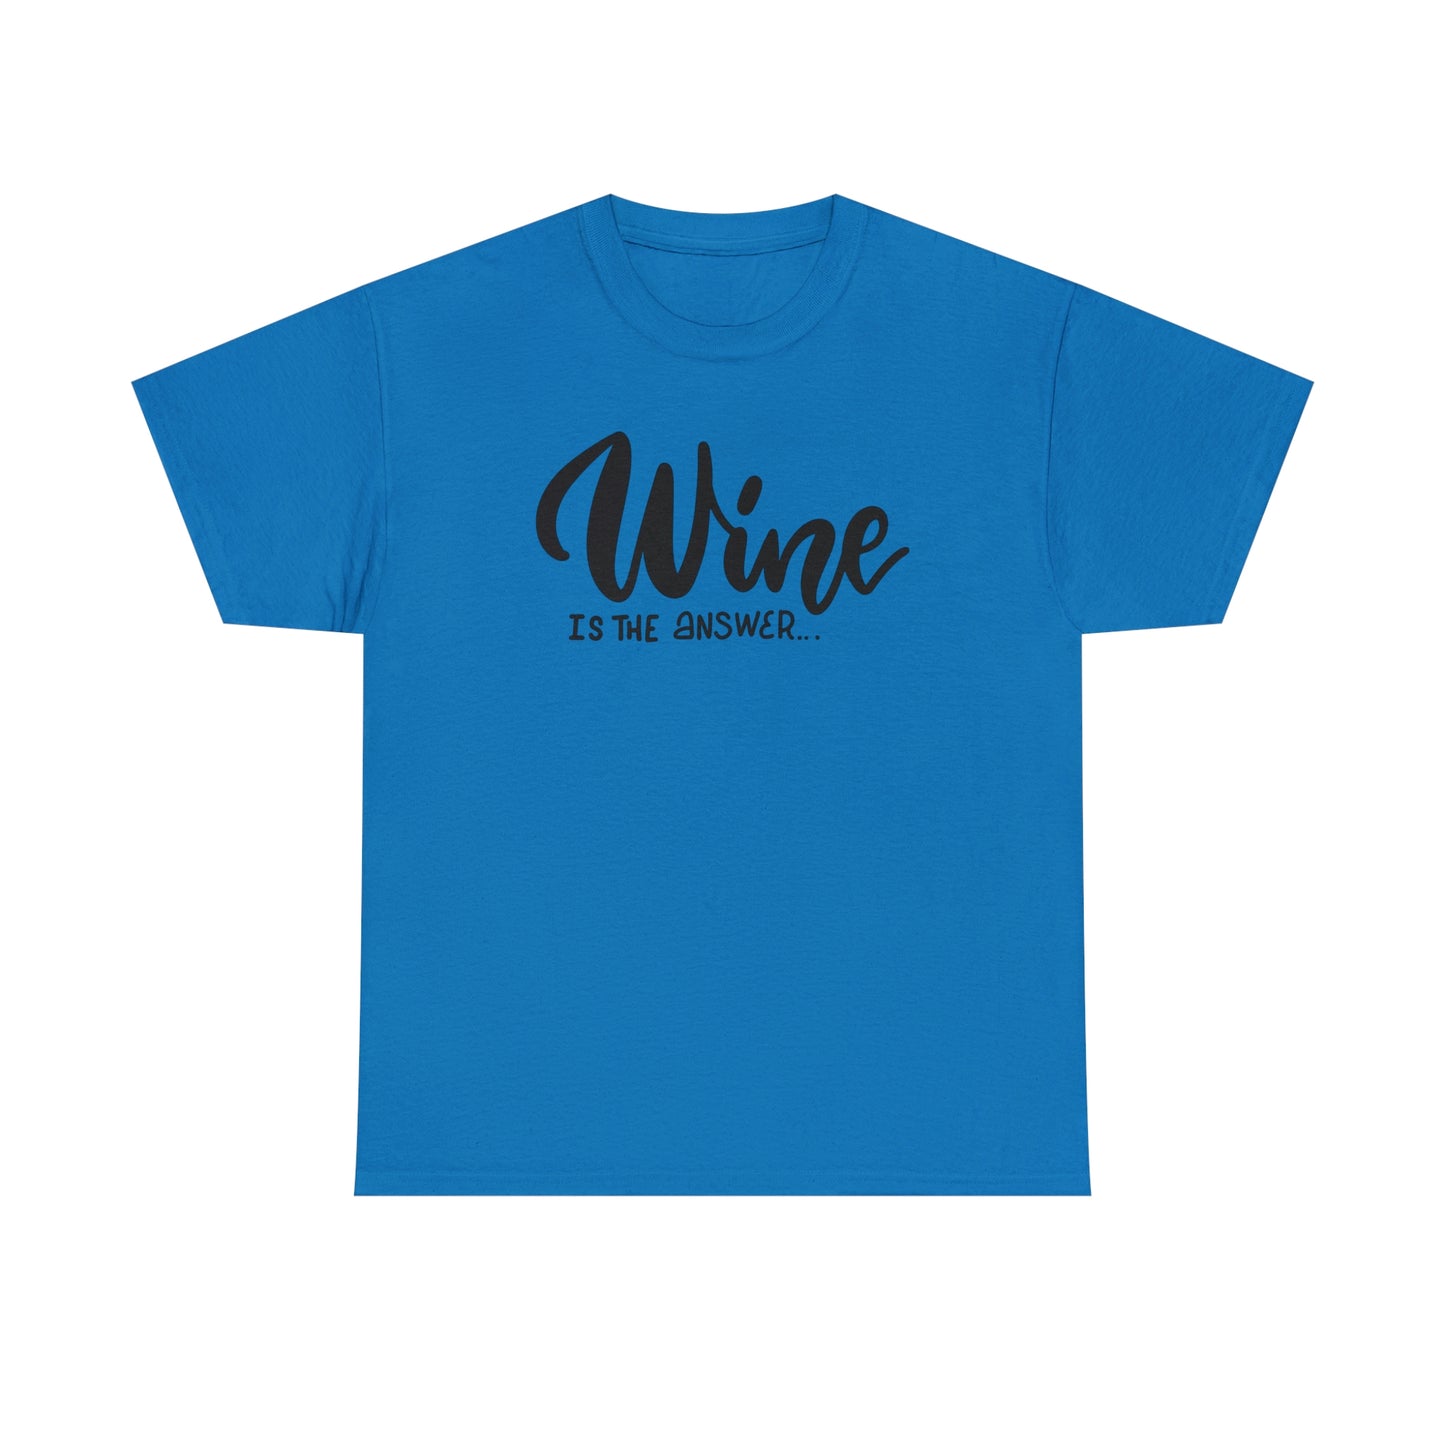 Wine Is The Answer T-Shirt For Wine Drinkers T Shirt For Wine Lovers TShirt For Oenophile Shirt For Wine Enthusiast Gift T-Shirt